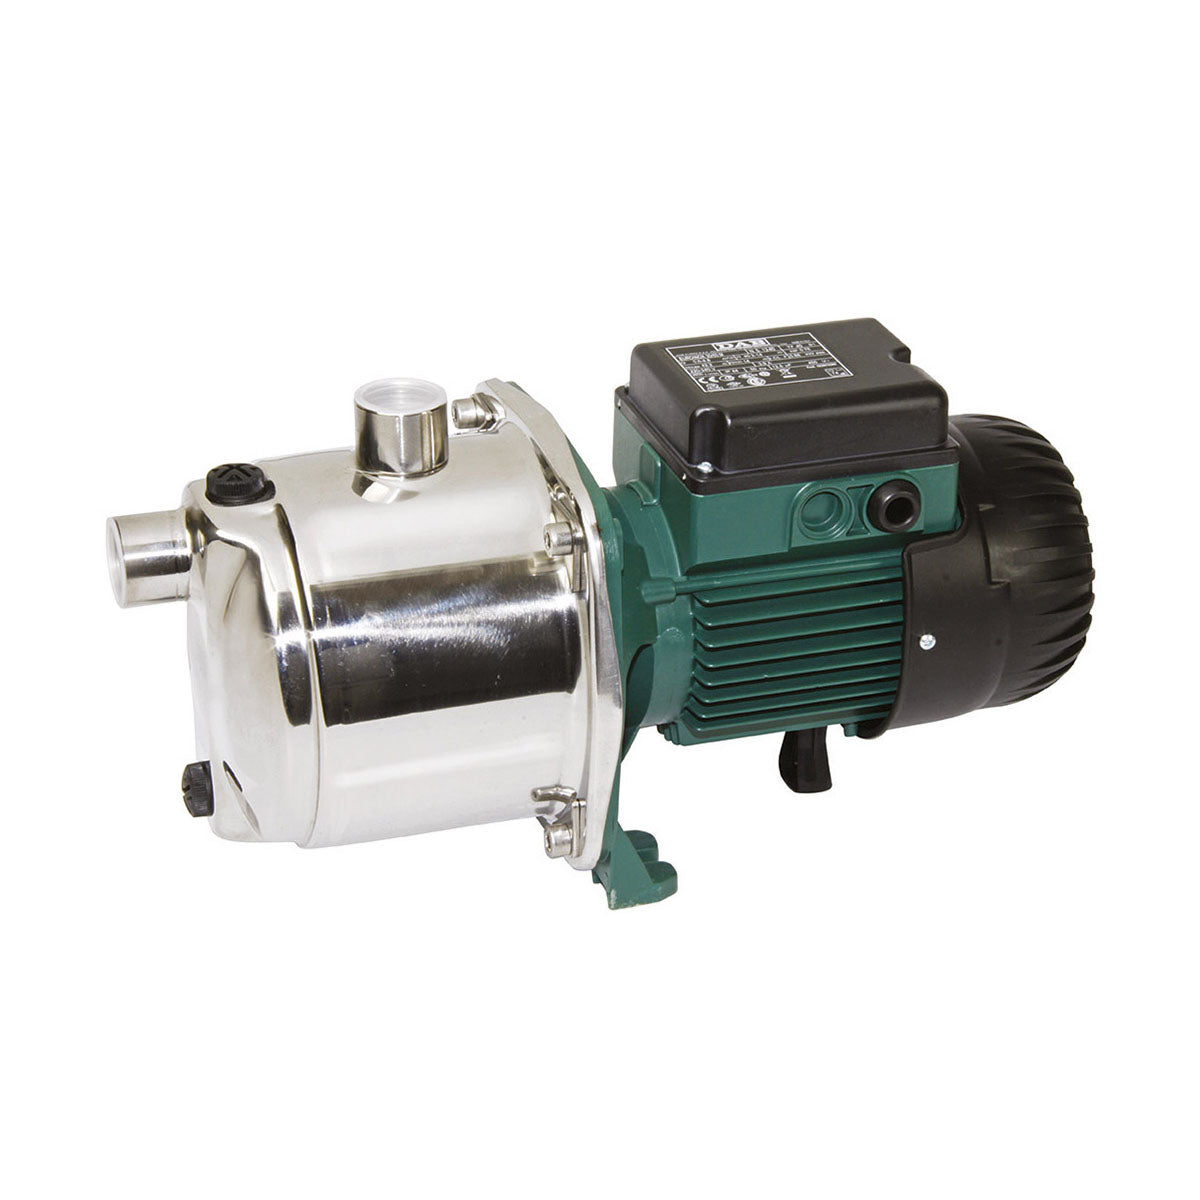 DAB Euroinox 50/50 pump with stainless steel pump body